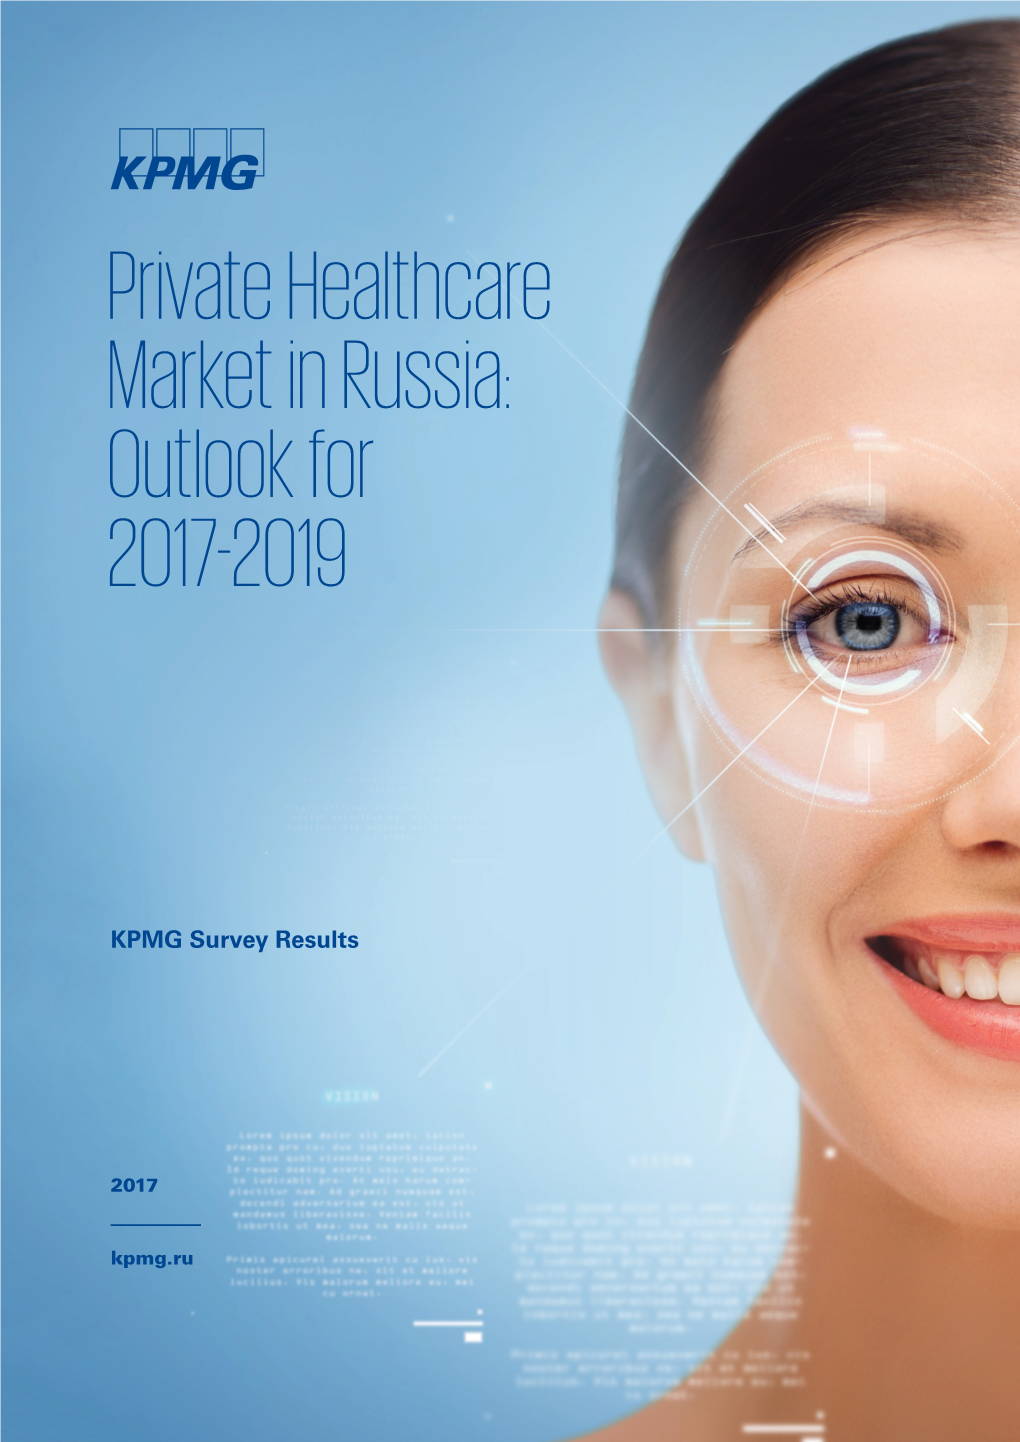 Private Healthcare Market in Russia: Outlook for 2017-2019